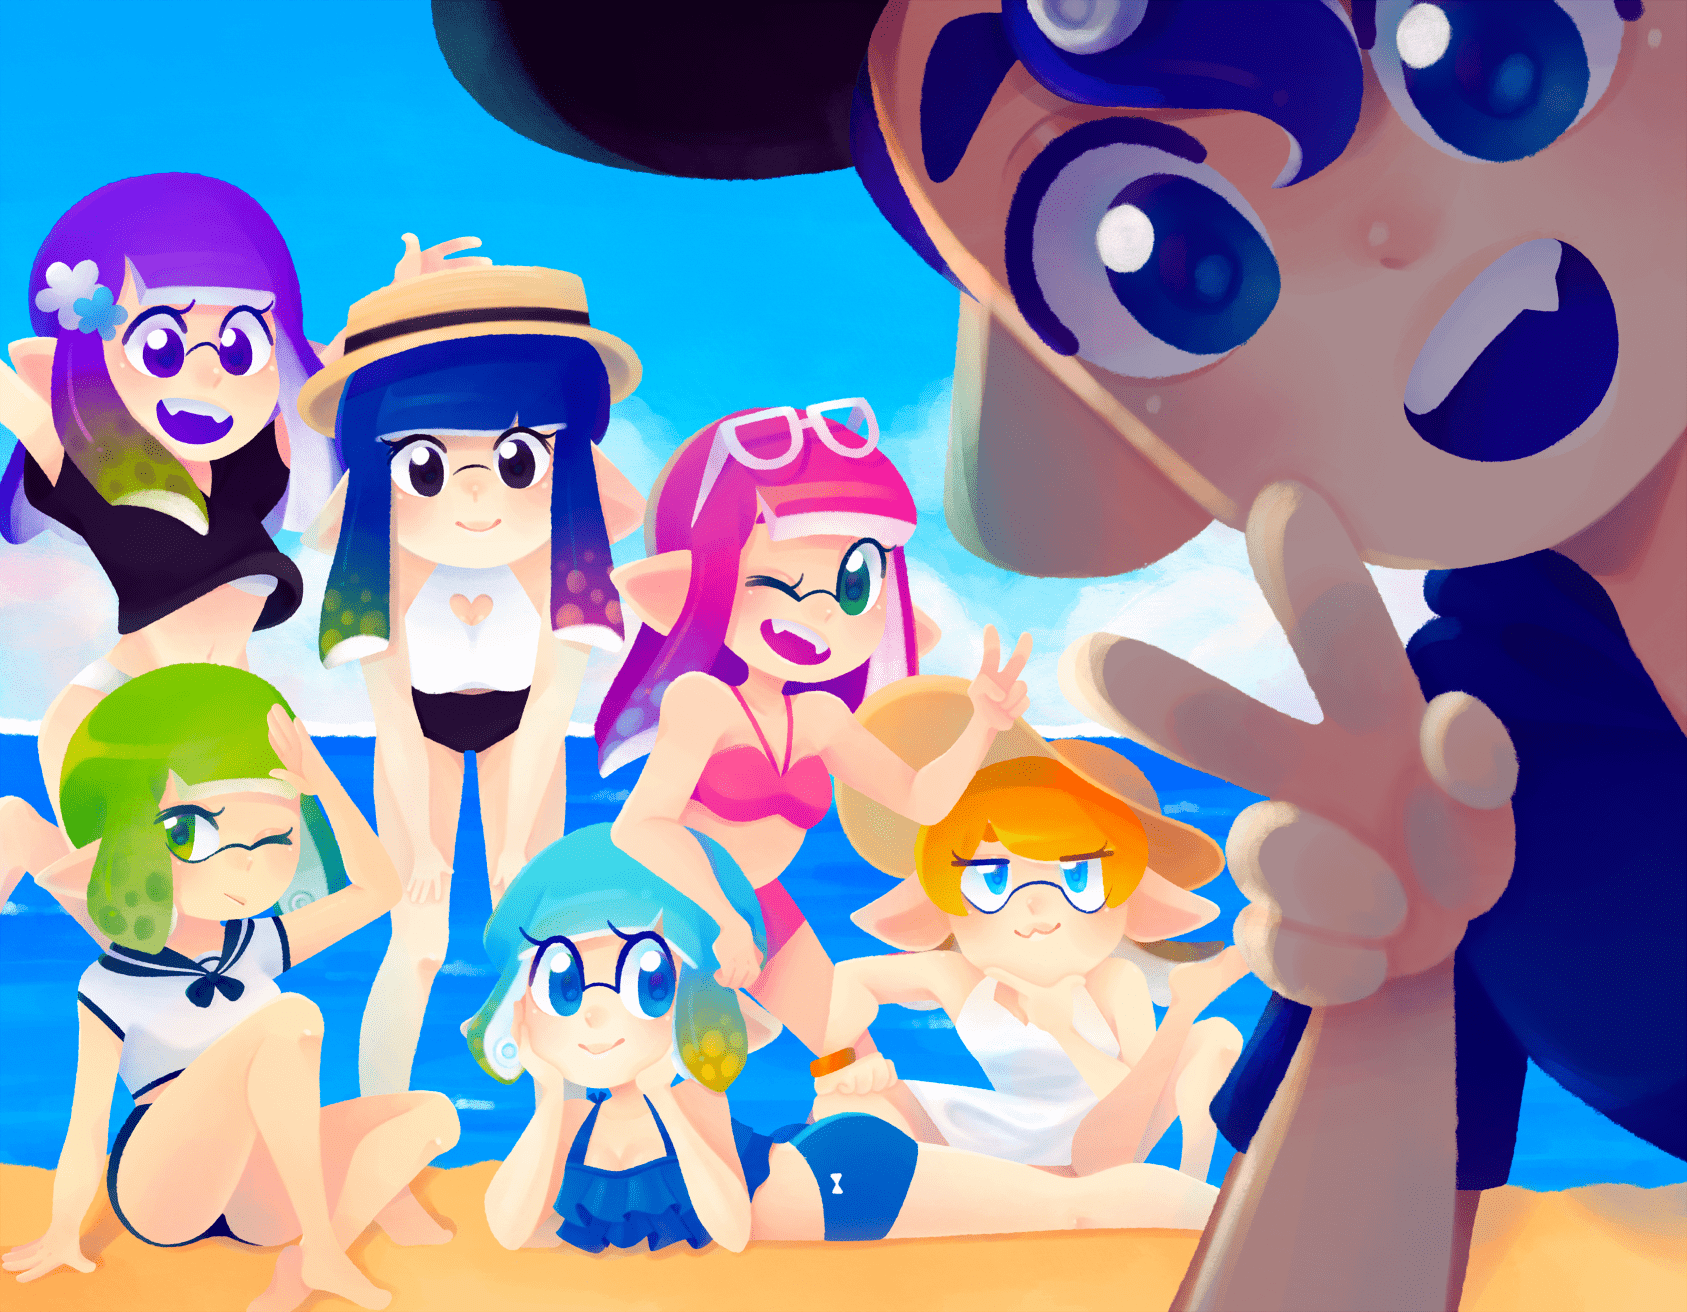 Holly Cheng - "Beach Day"